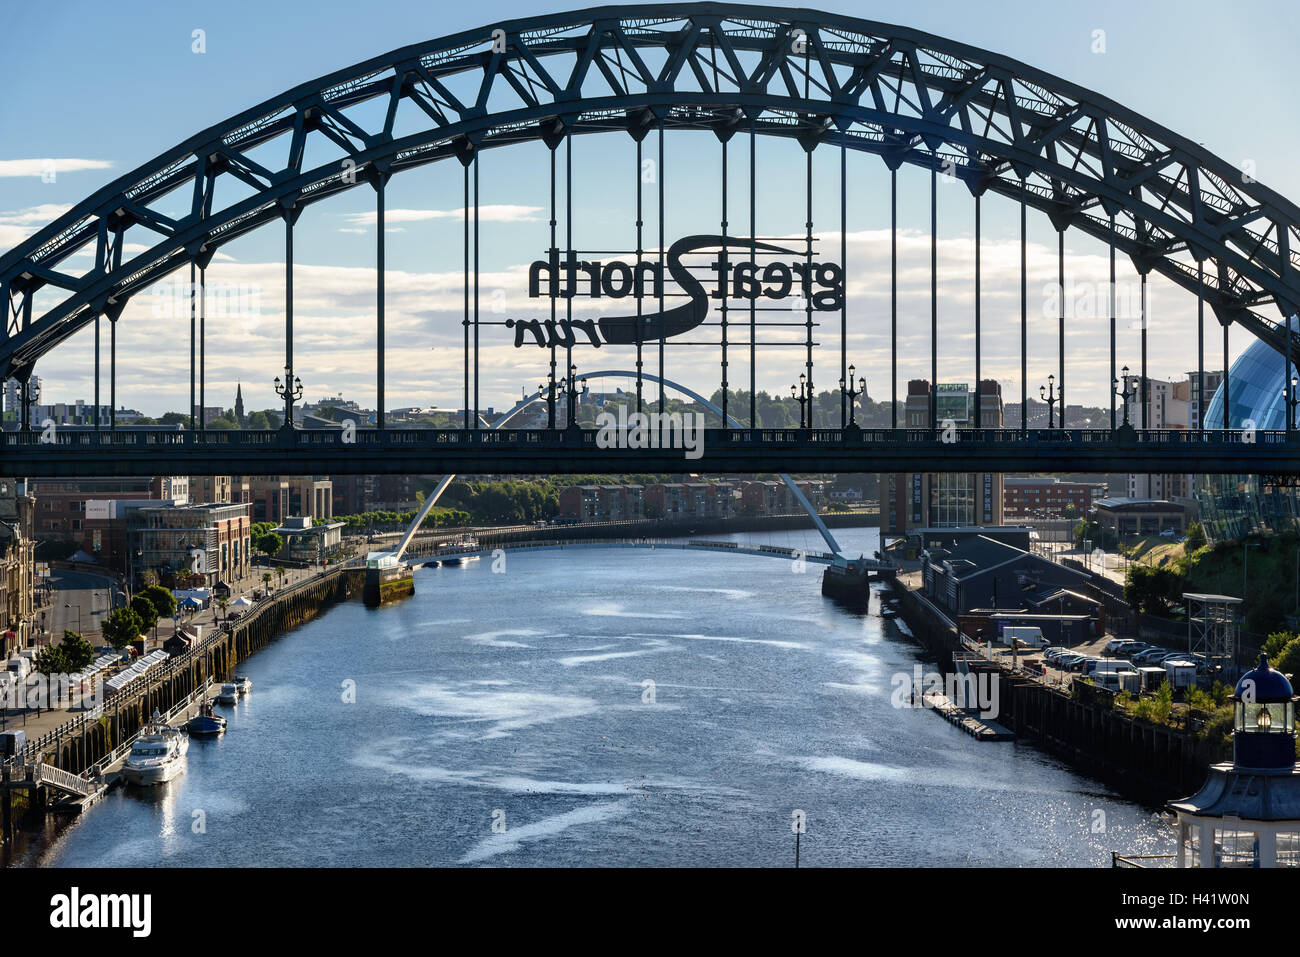 The Tyne Bridge is a through arch bridge over the River Tyne in North East England, Newcastle. Stock Photo